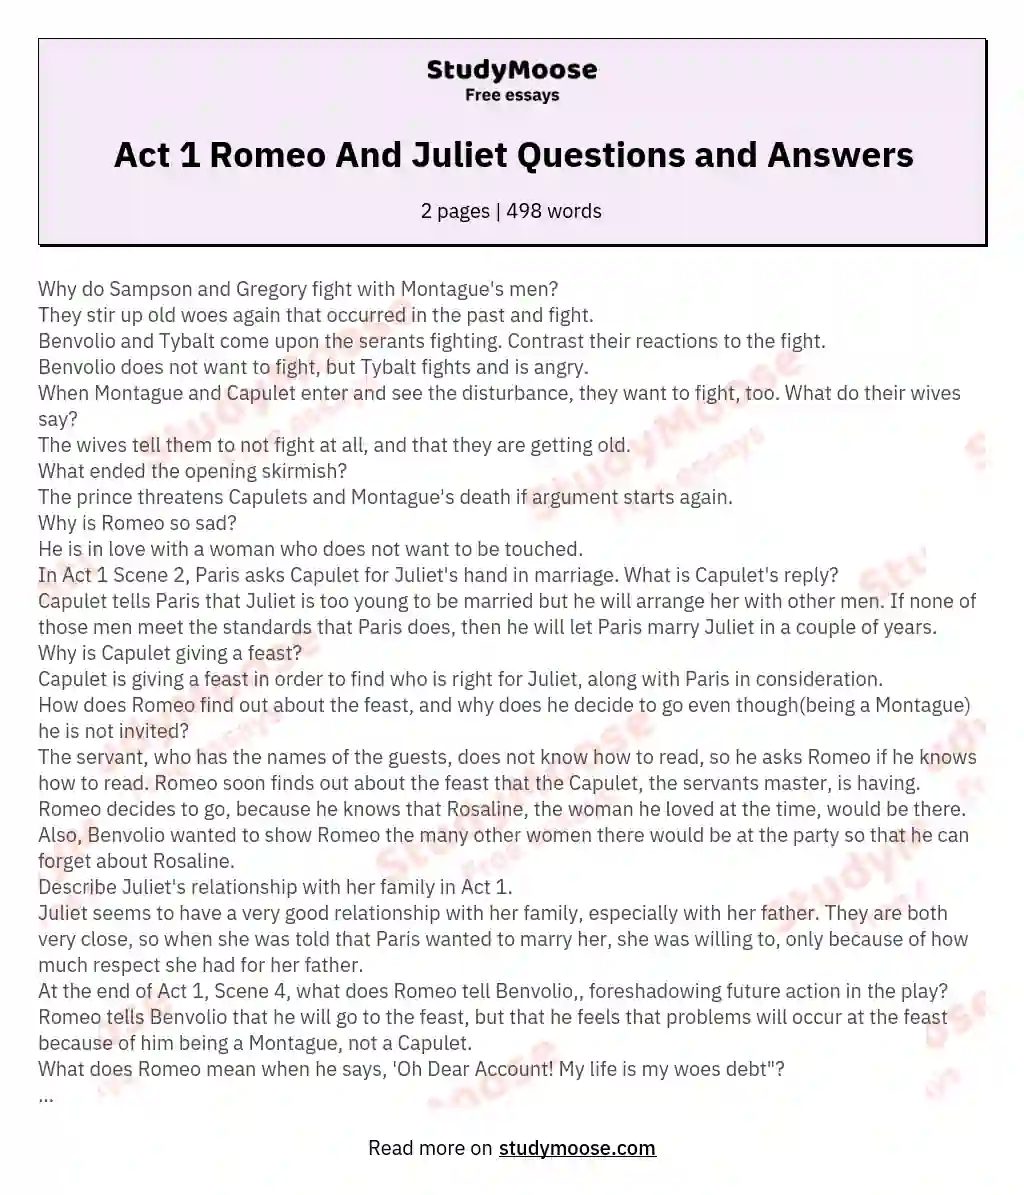 topic sentence romeo and juliet essay